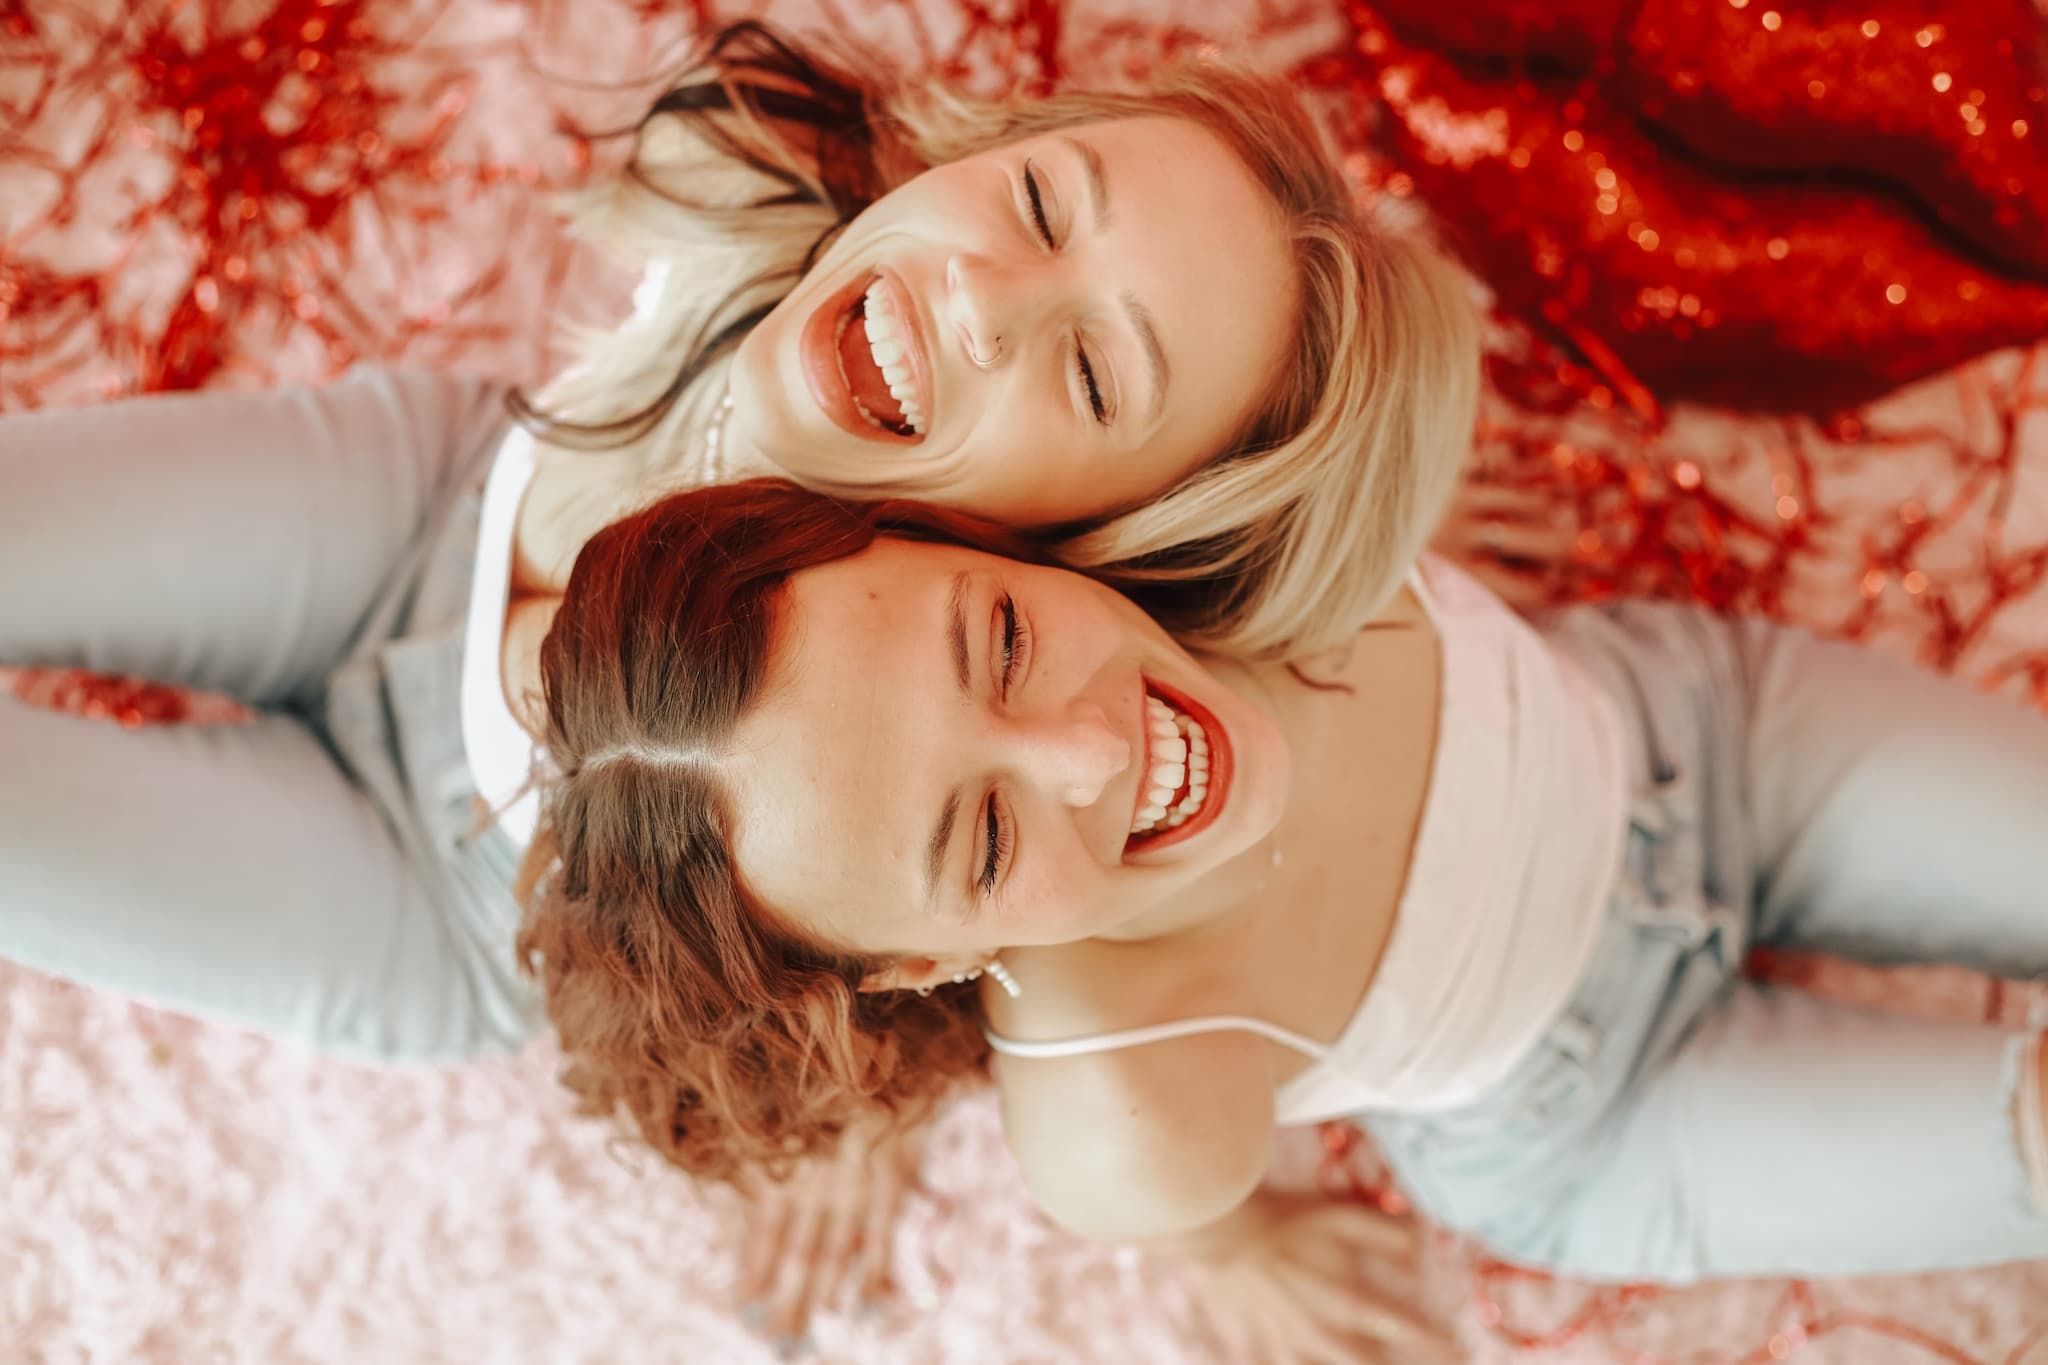 A Fun-filled Galentine's Photo Session at Neon Poppy Studios